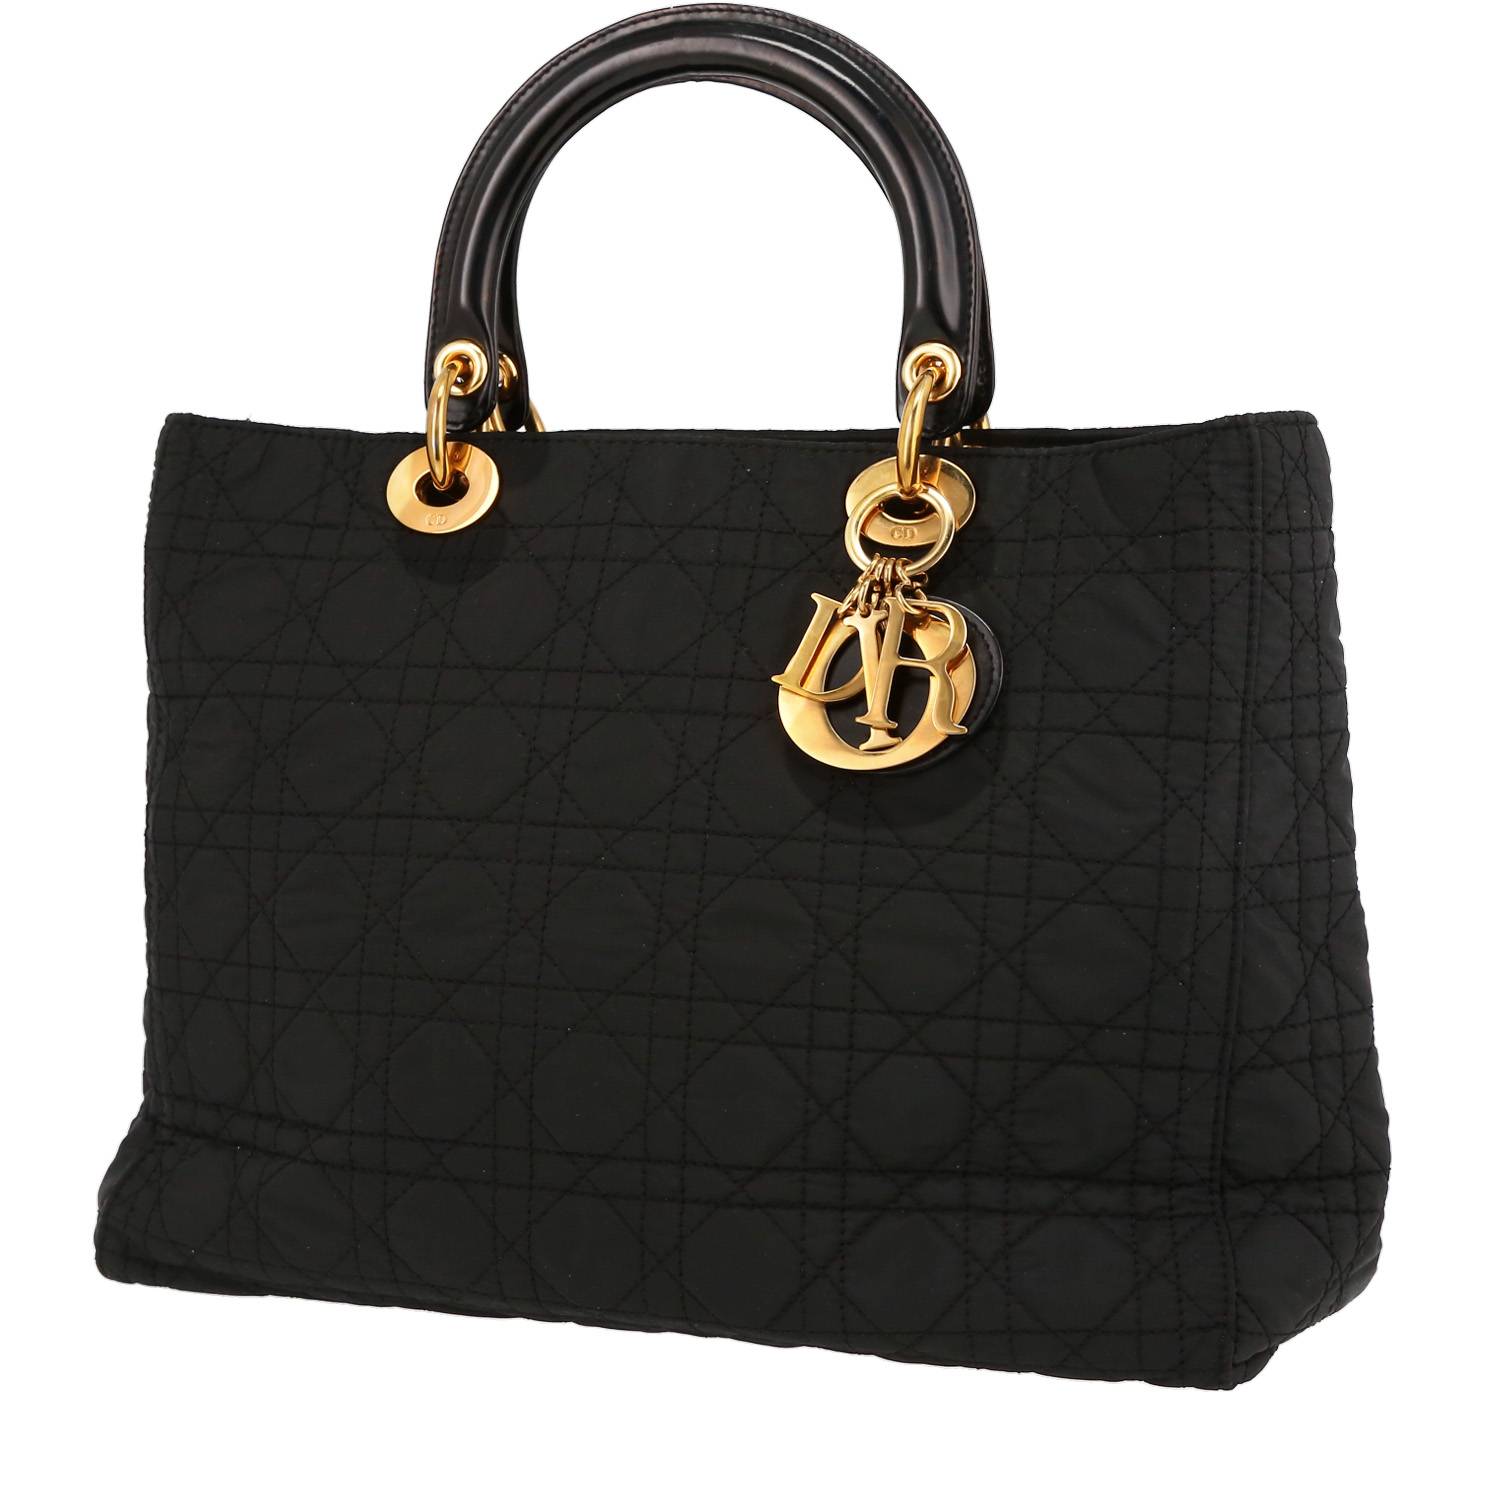 Lady Dior Handbag In Black Canvas Cannage And Black Patent